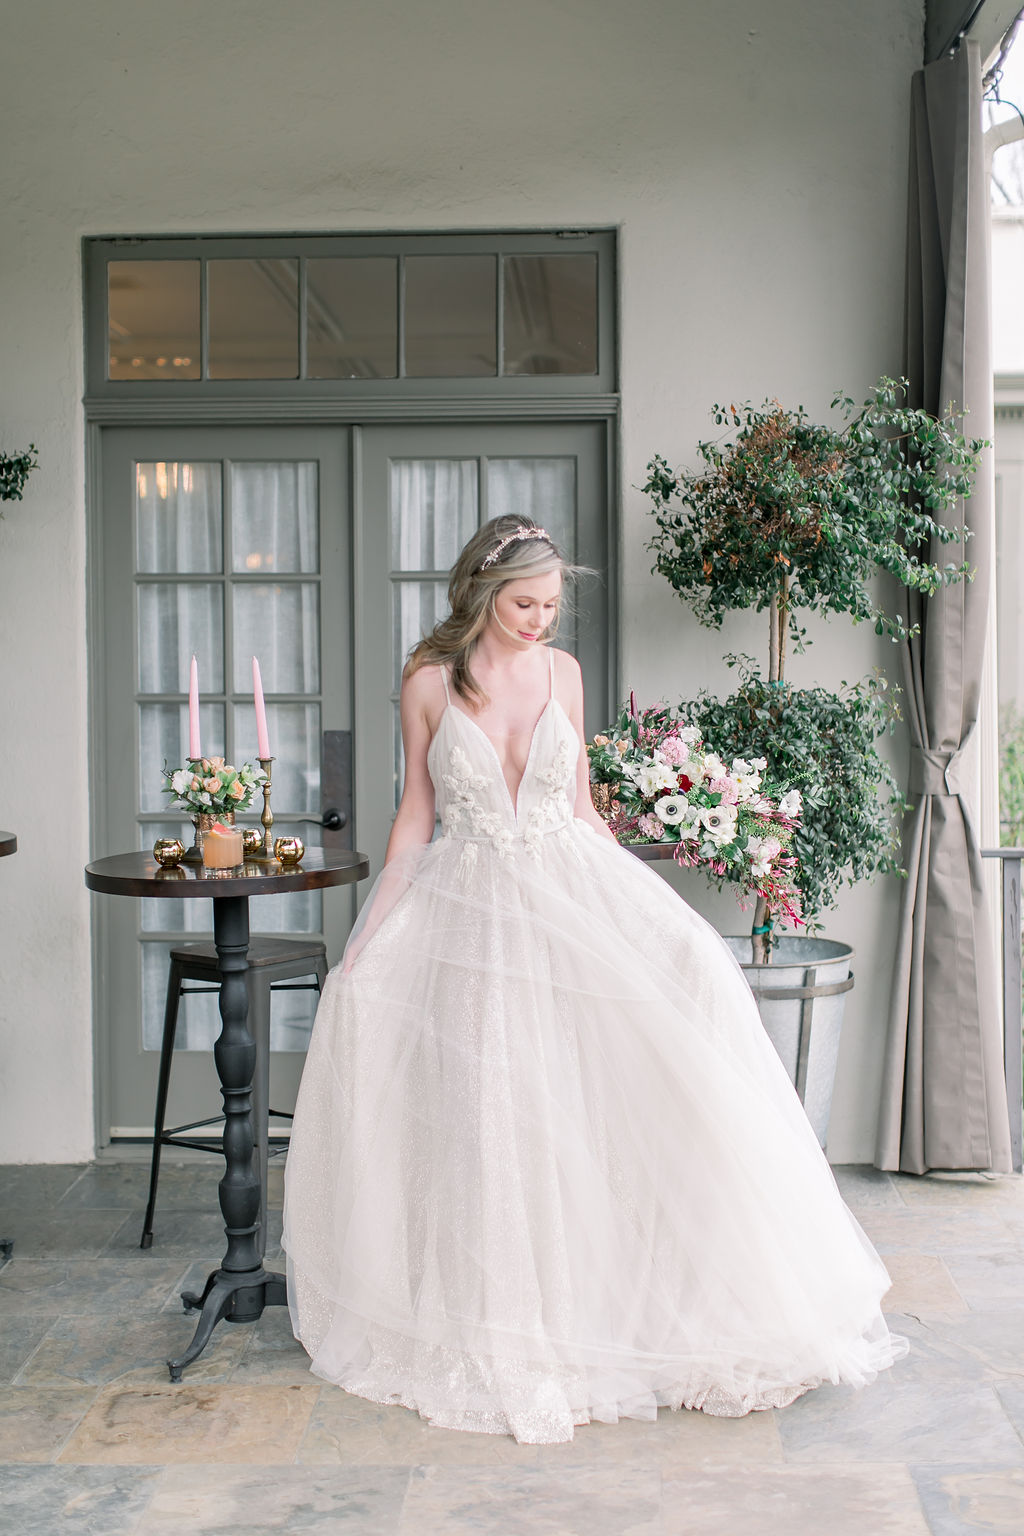 Nature Meets Luxury in this Romantic Bridal Inspired Shoot